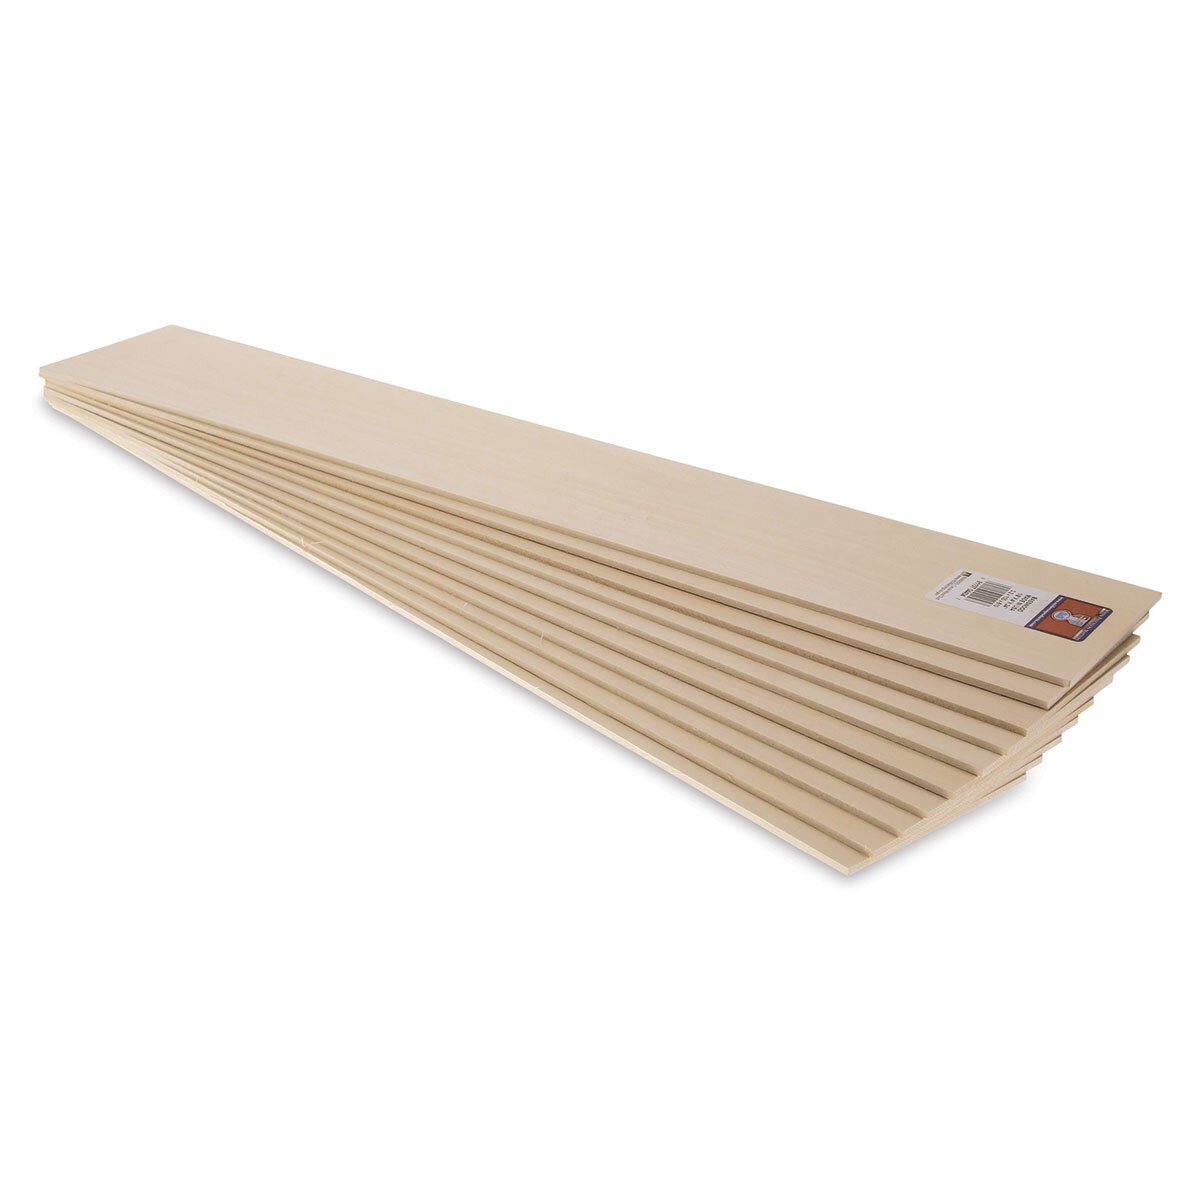 Midwest Products 5011 3/16" x 6" x 36" Basswood Shee